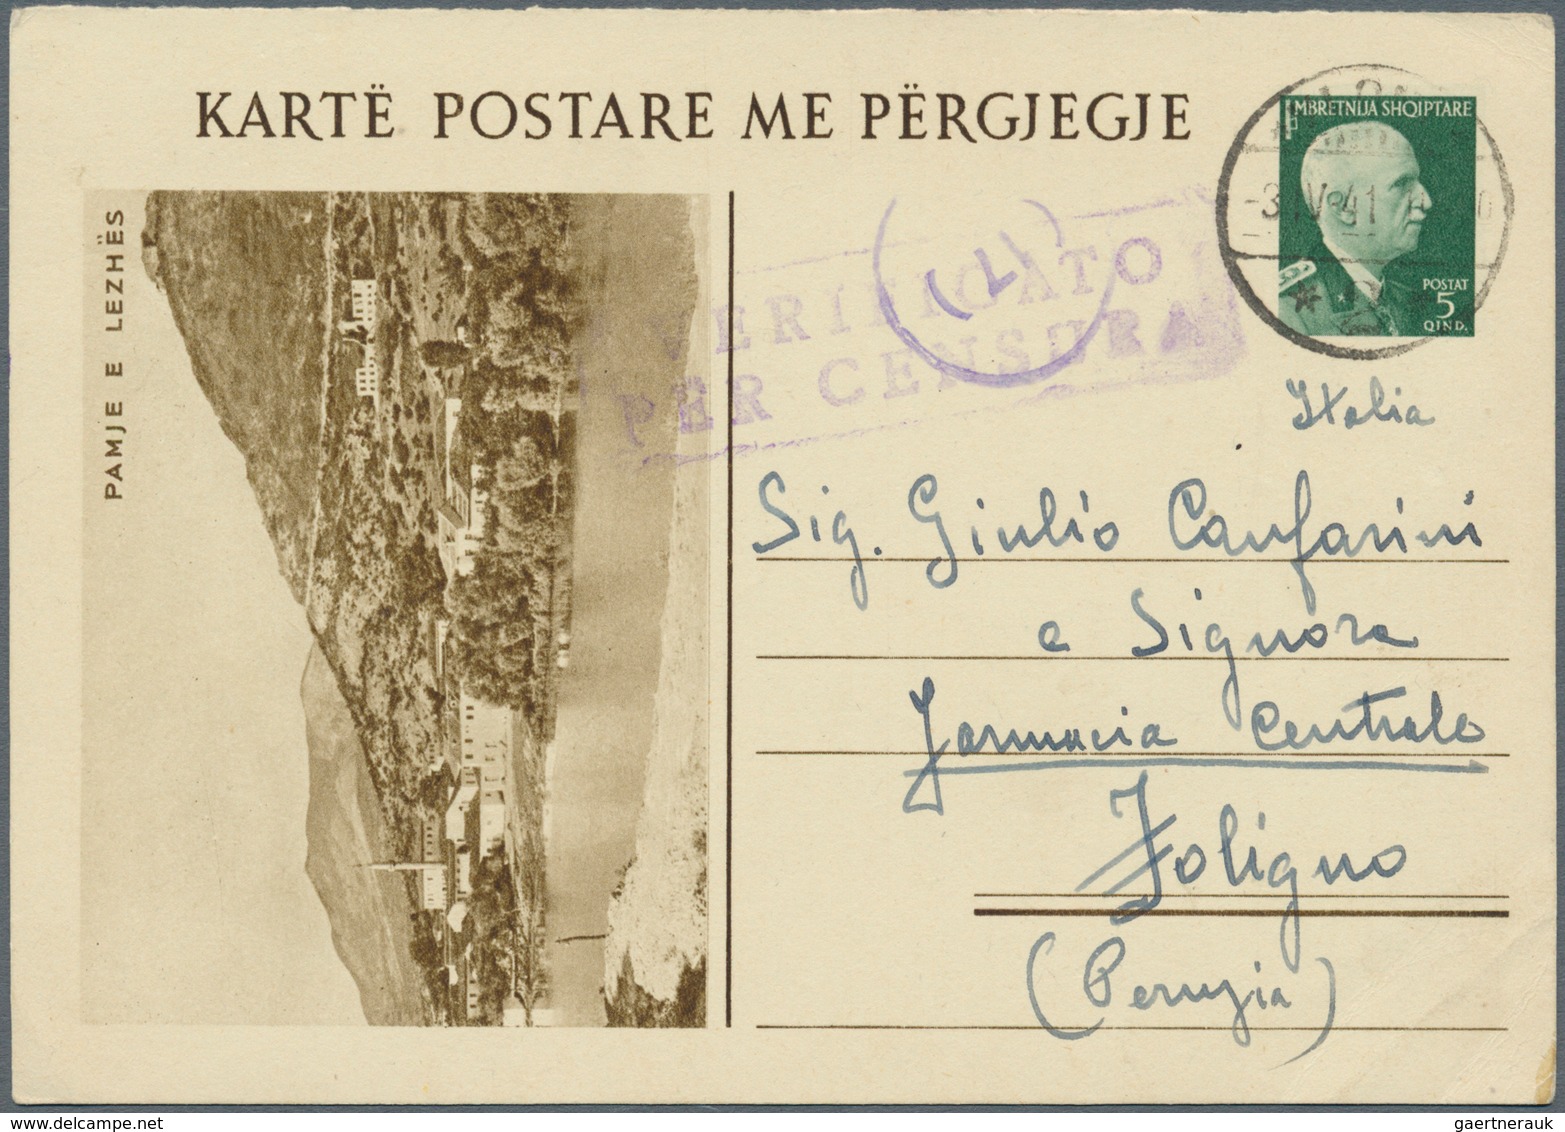 Albanien - Ganzsachen: 1941, 5 Q Green Postal Stationery Picture Replay Card (Pamje E Lezhes) With C - Albania